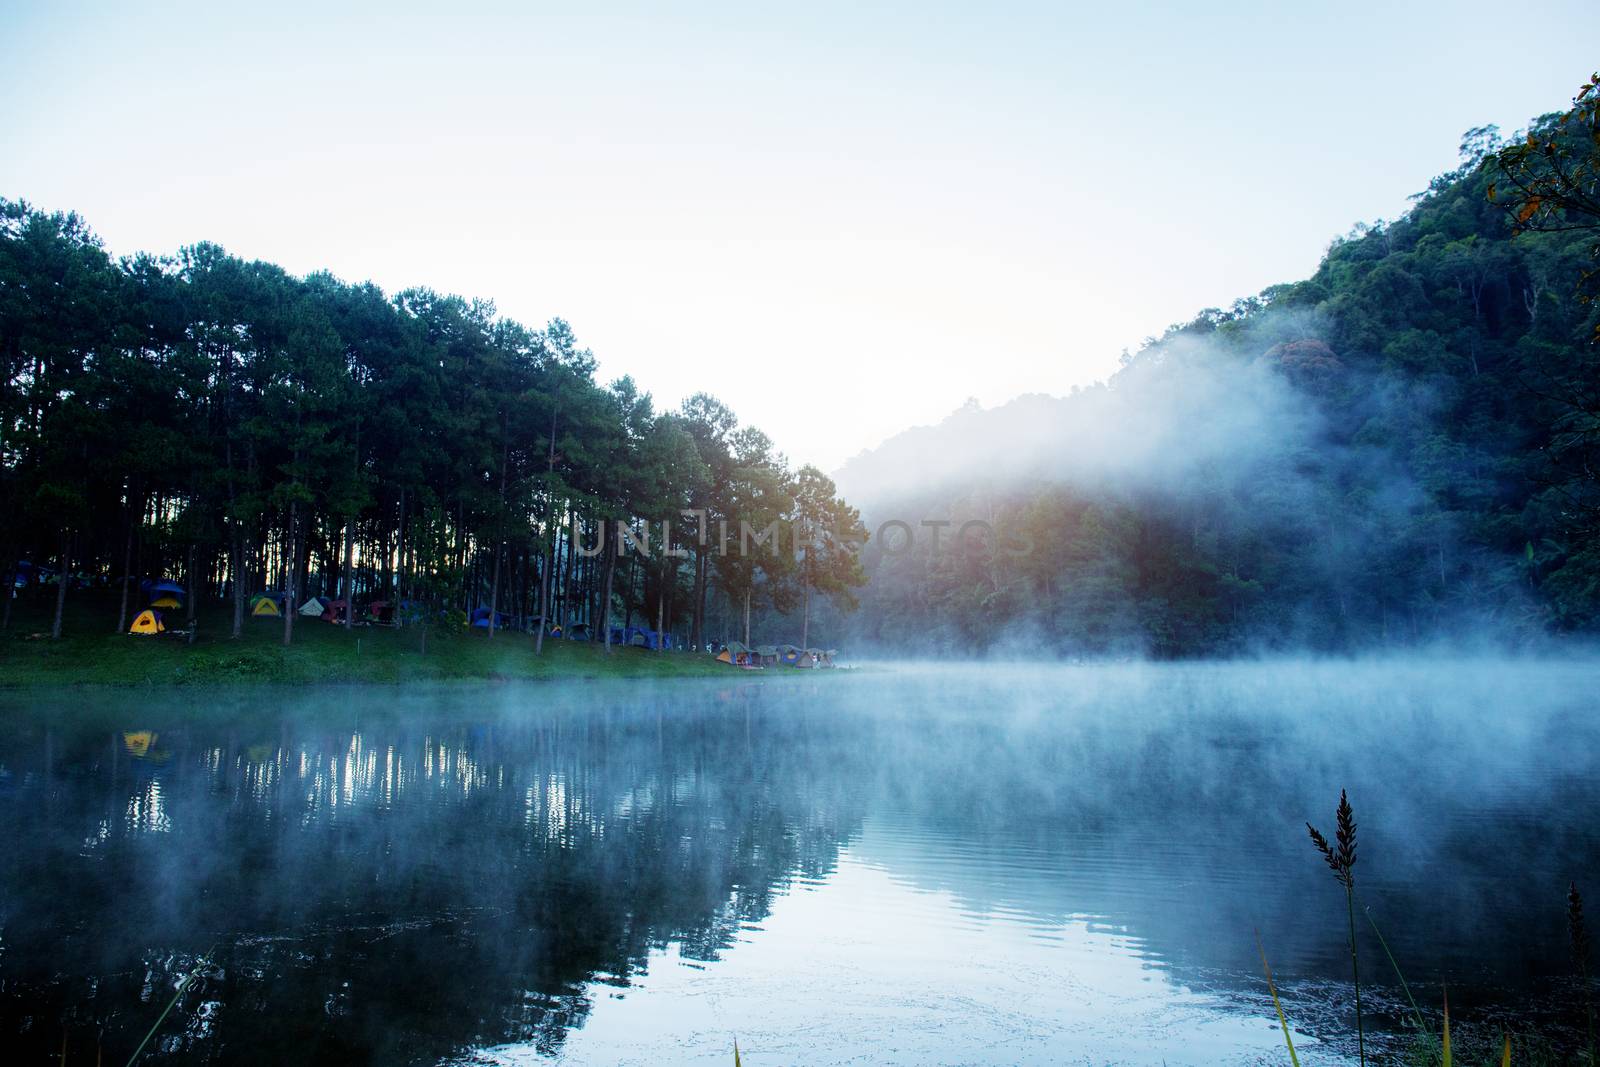 Pang oung reservoir with fog at morning in the winter.